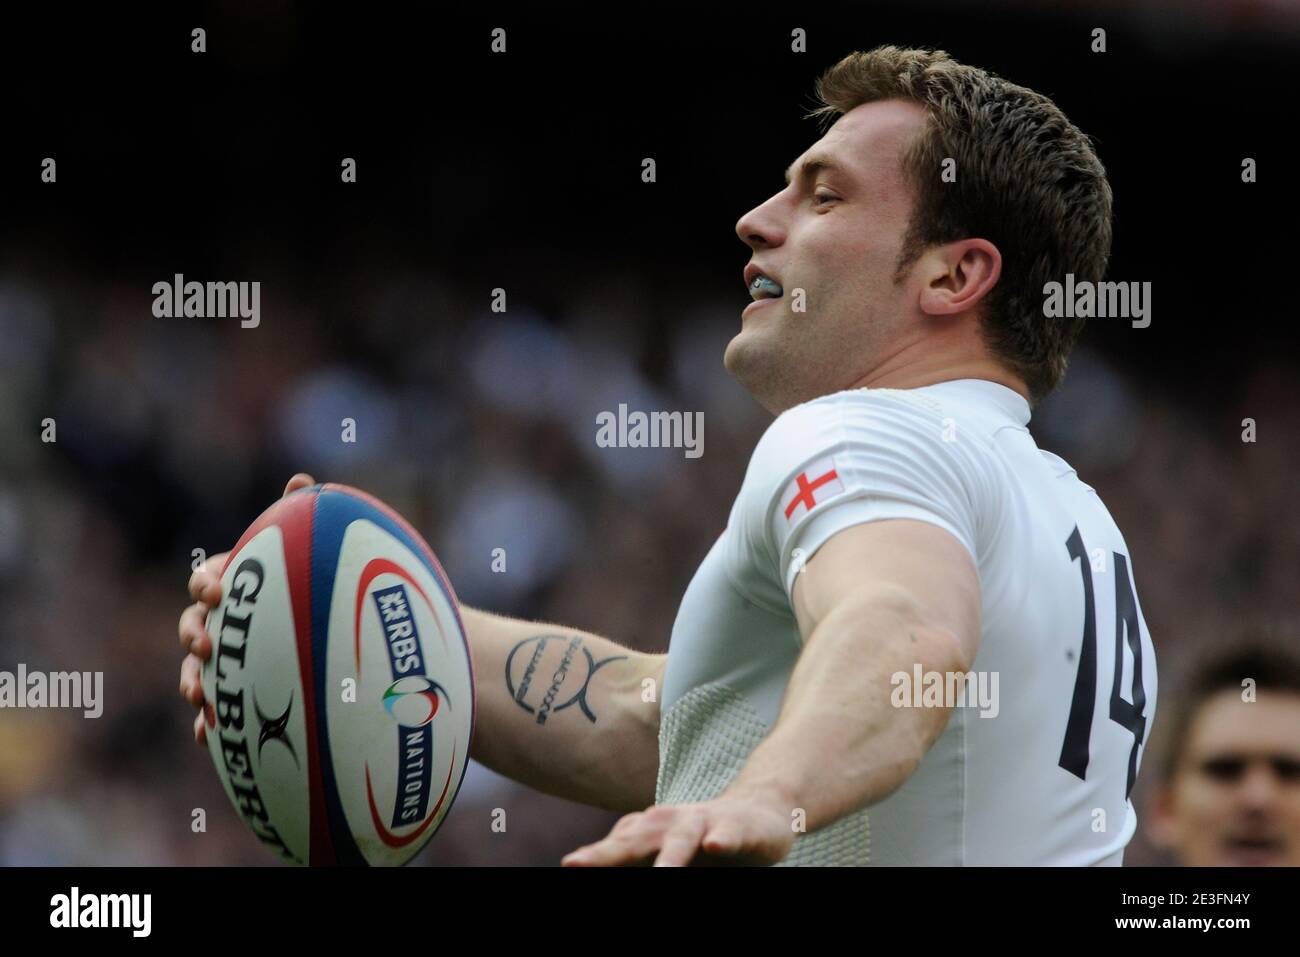 Joy after try by Mark Cueto during the RBS 6 Nations Championship 2009 Rugby match, England vs France at the Twickenham stadium in London, UK on March 15, 2009. England won 34-10. Photo by Henri Szwarc/ABACAPRESS.COM Stock Photo